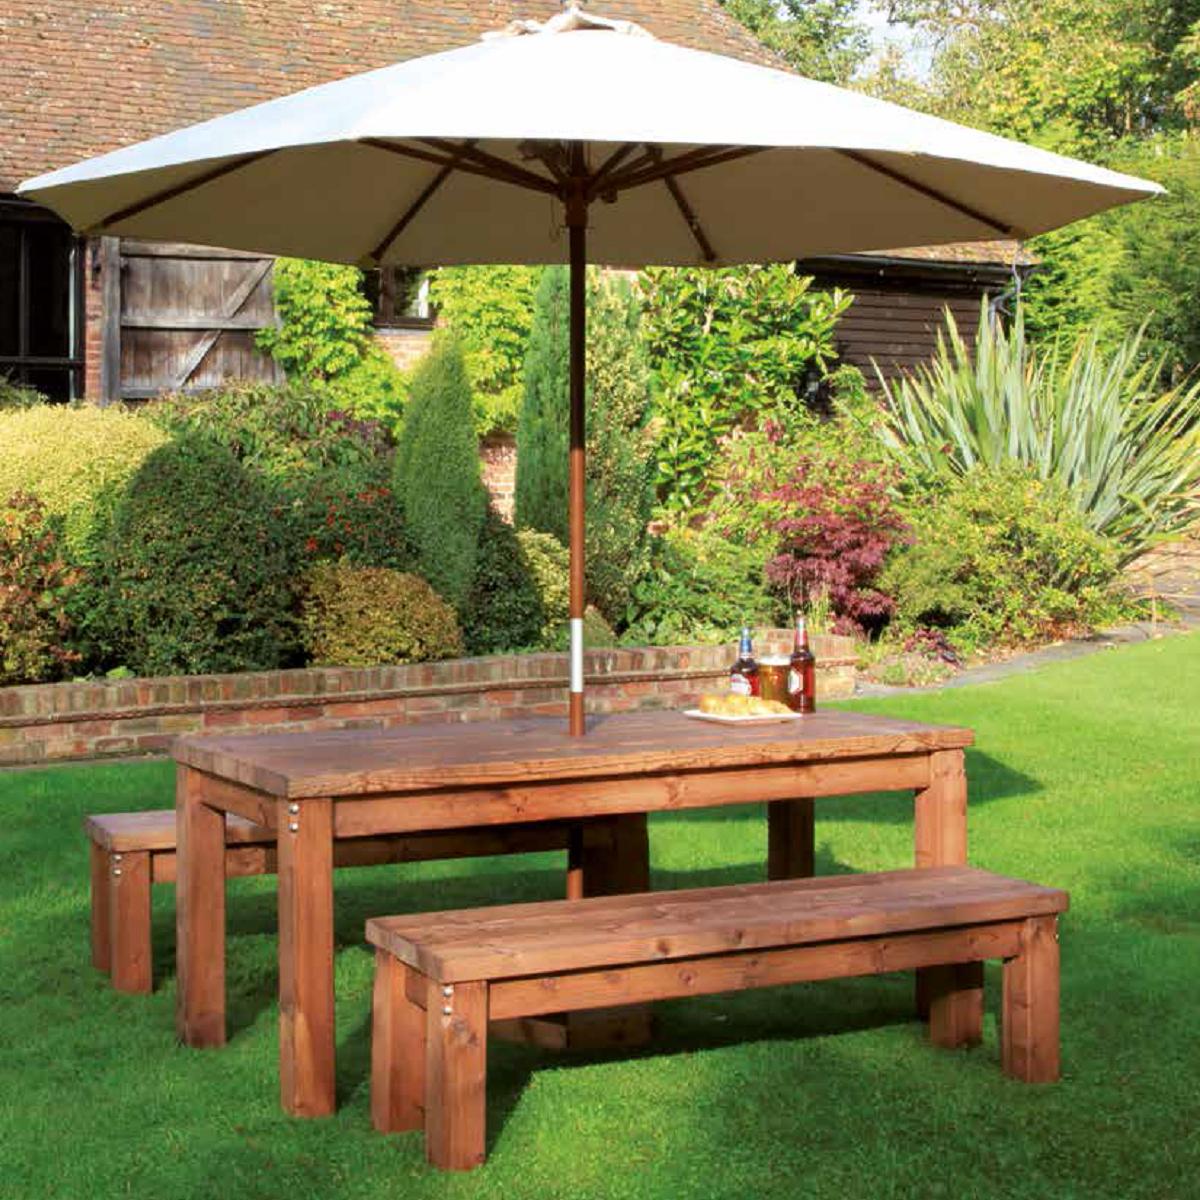 A chunky wooden rectangular table with backless wooden benches either side and a cream parasol